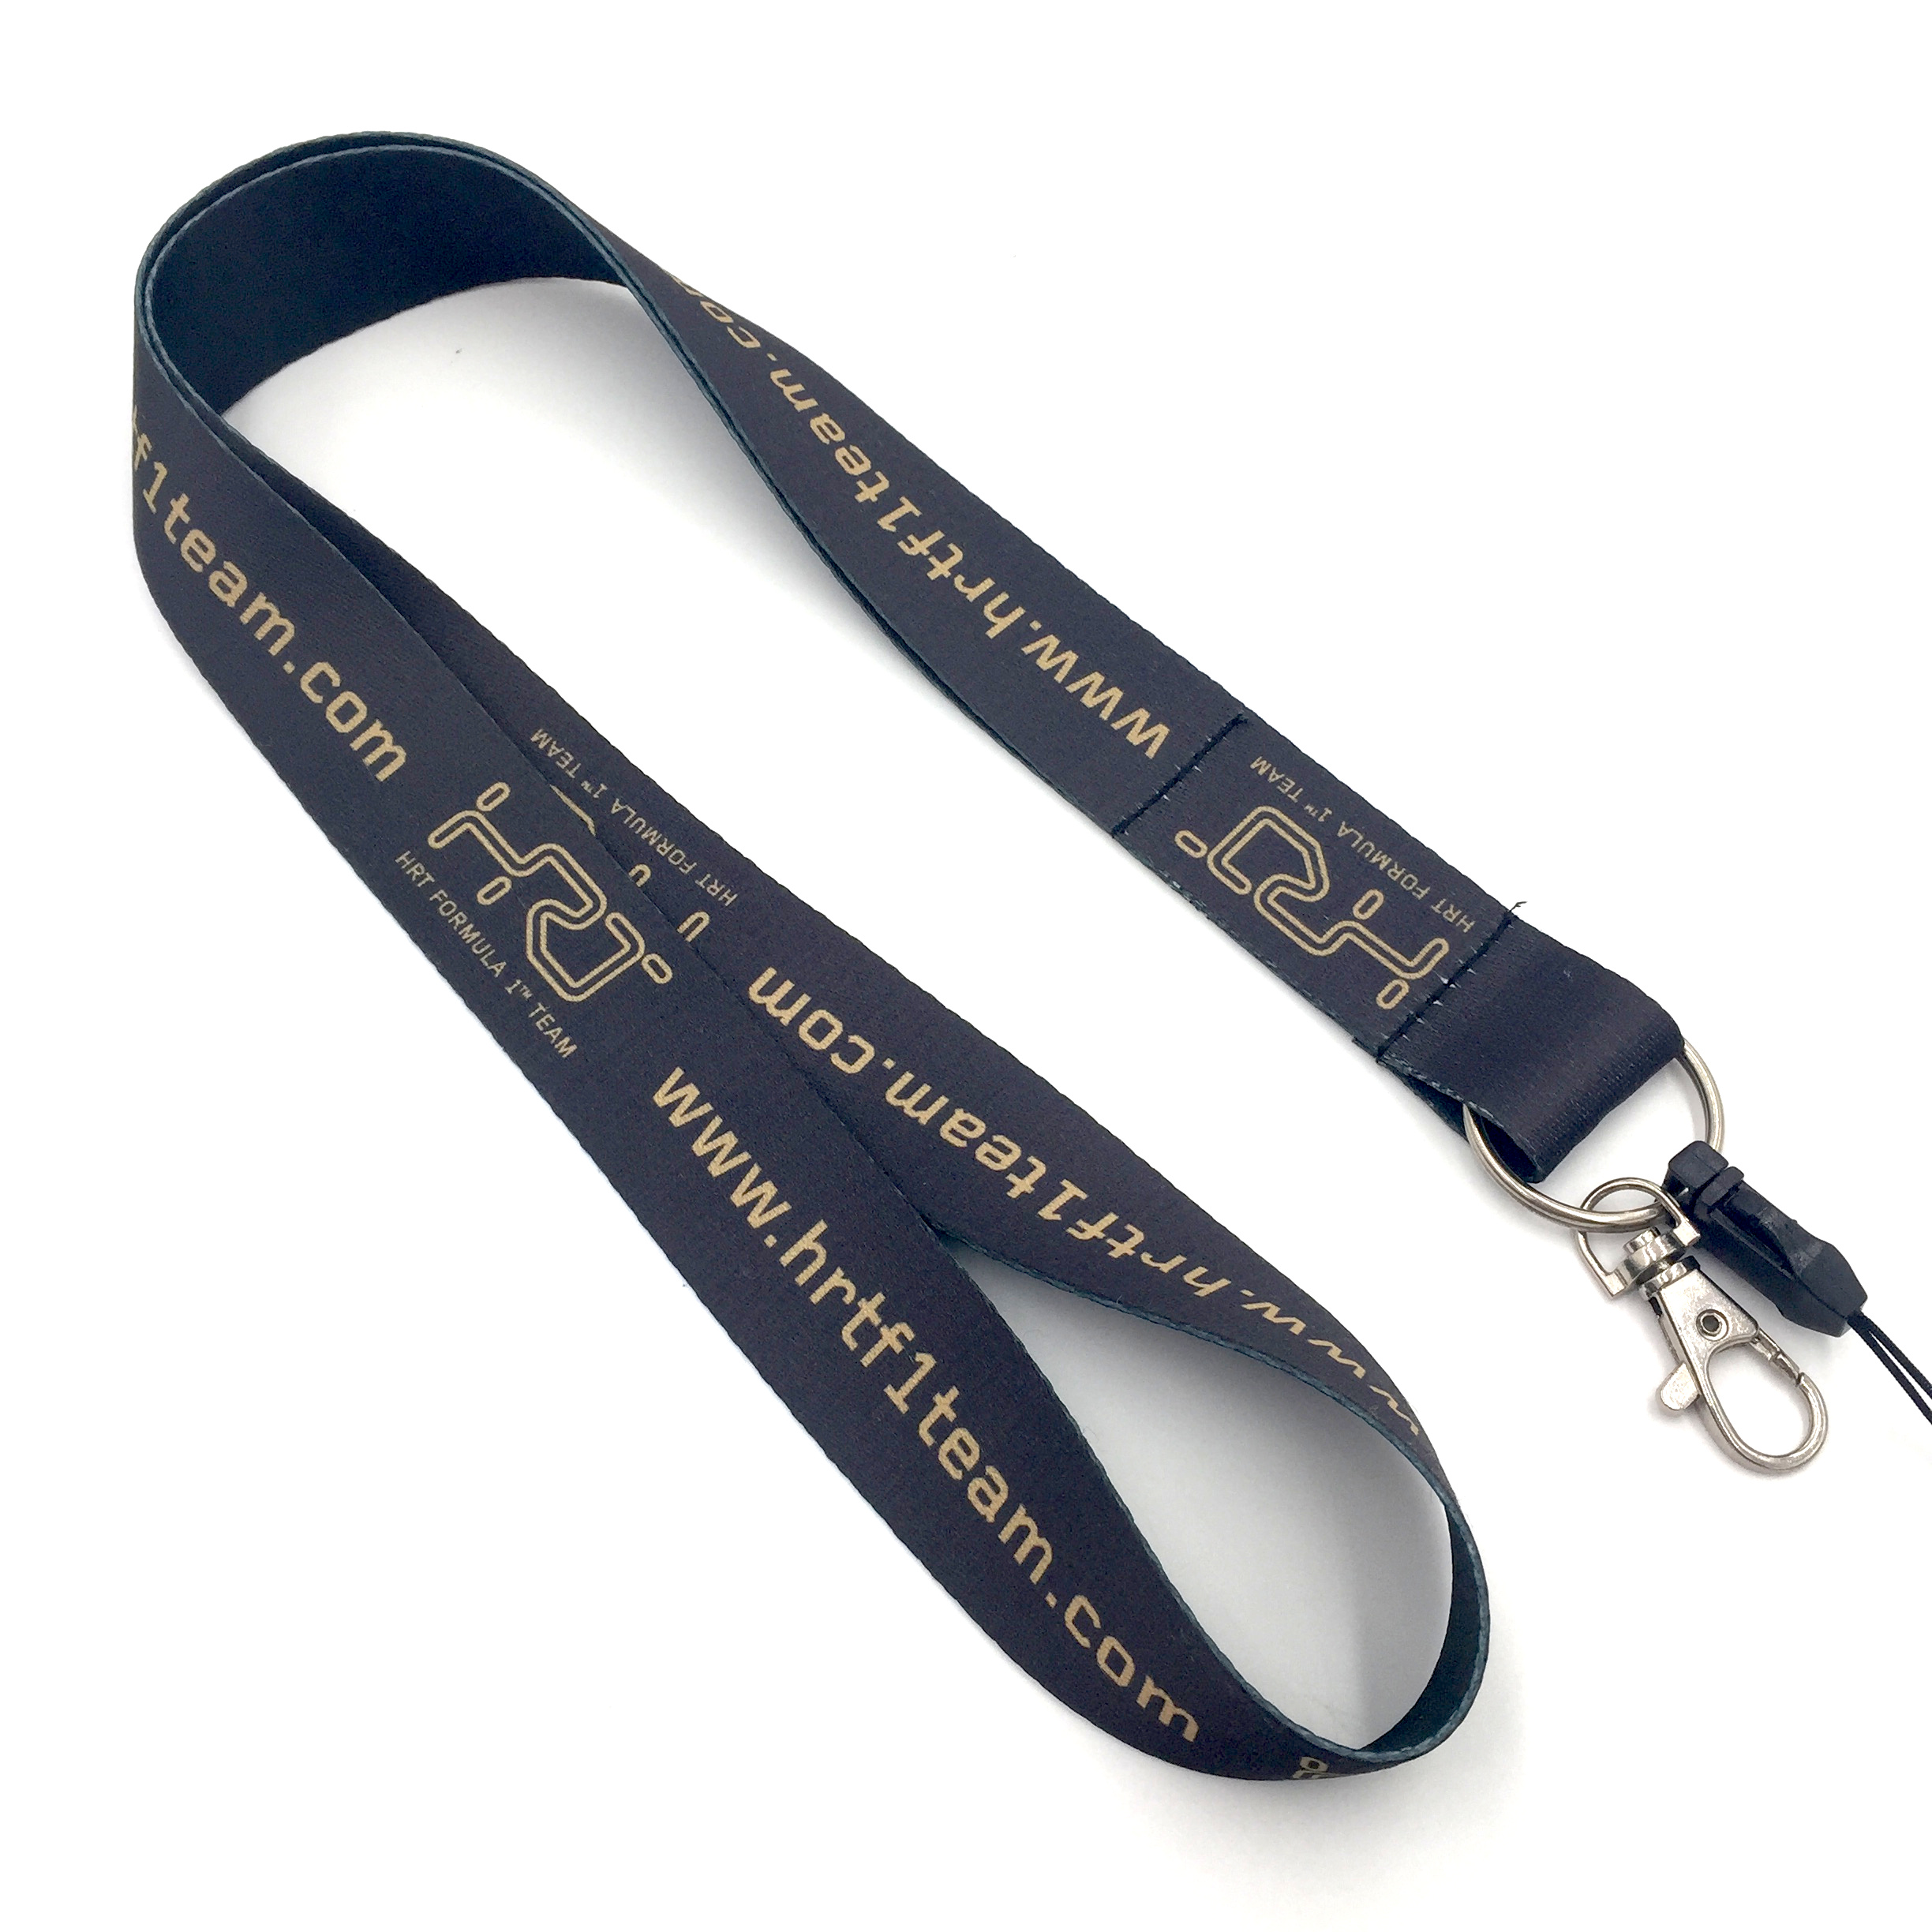 Professional China Lanyard Keychain For Printing - black lanyard with custom logo polyester sublimation printed cell phone key id card holder neck clip badge personalized lanyard – Bison